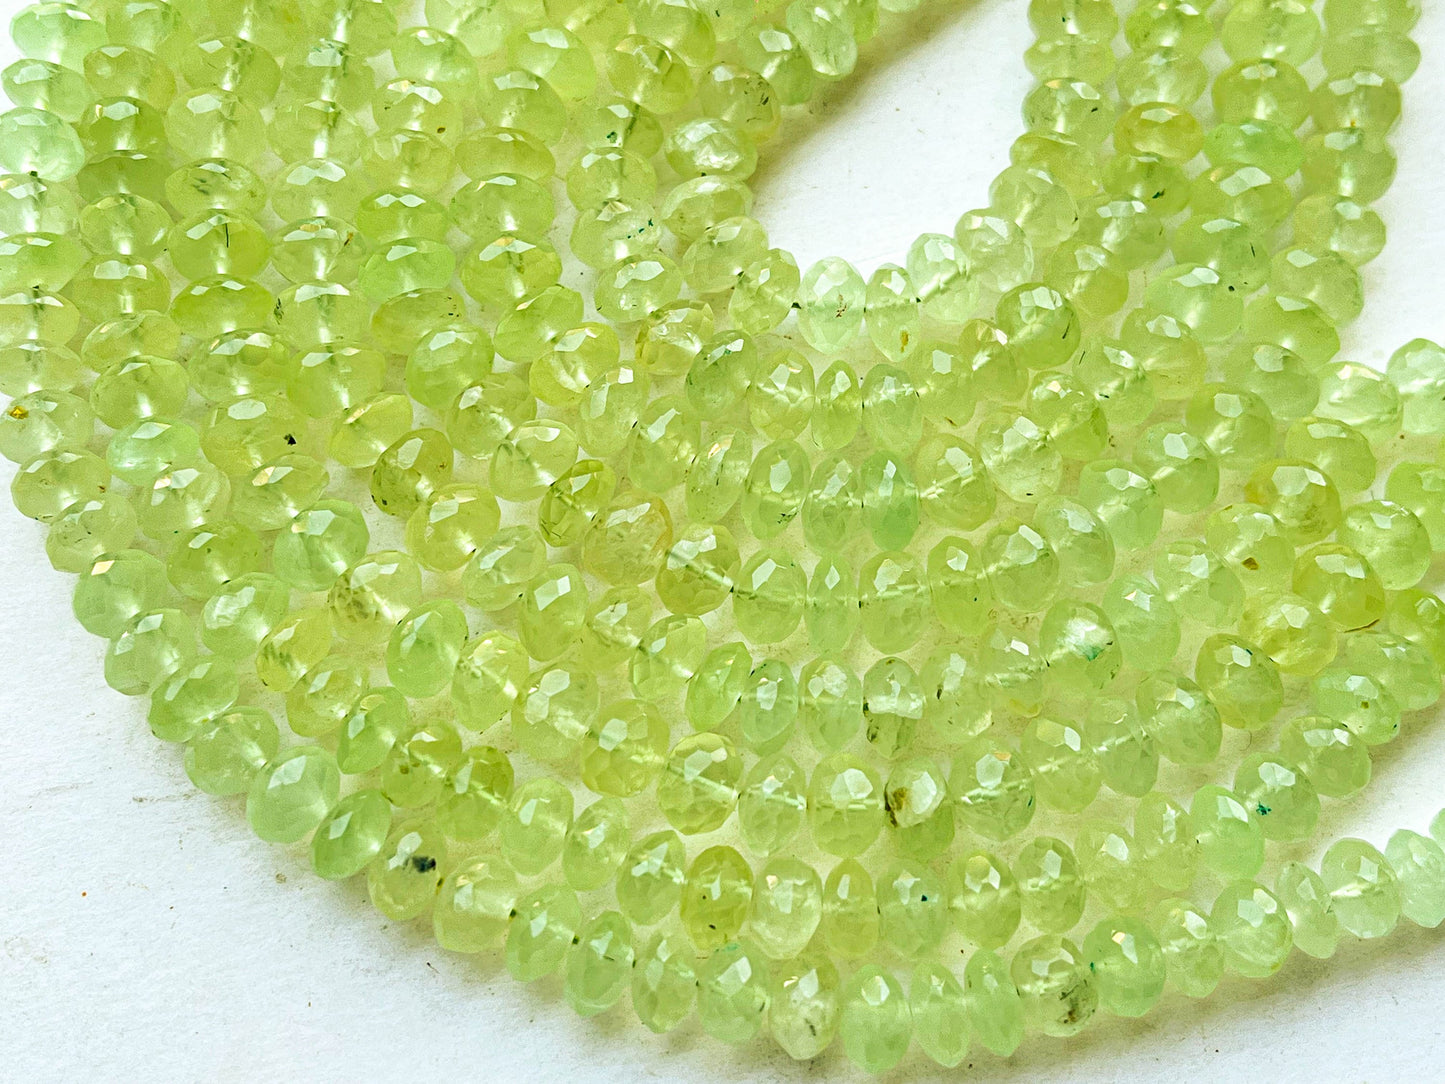 Prehnite Beads Faceted Rondelle Shape